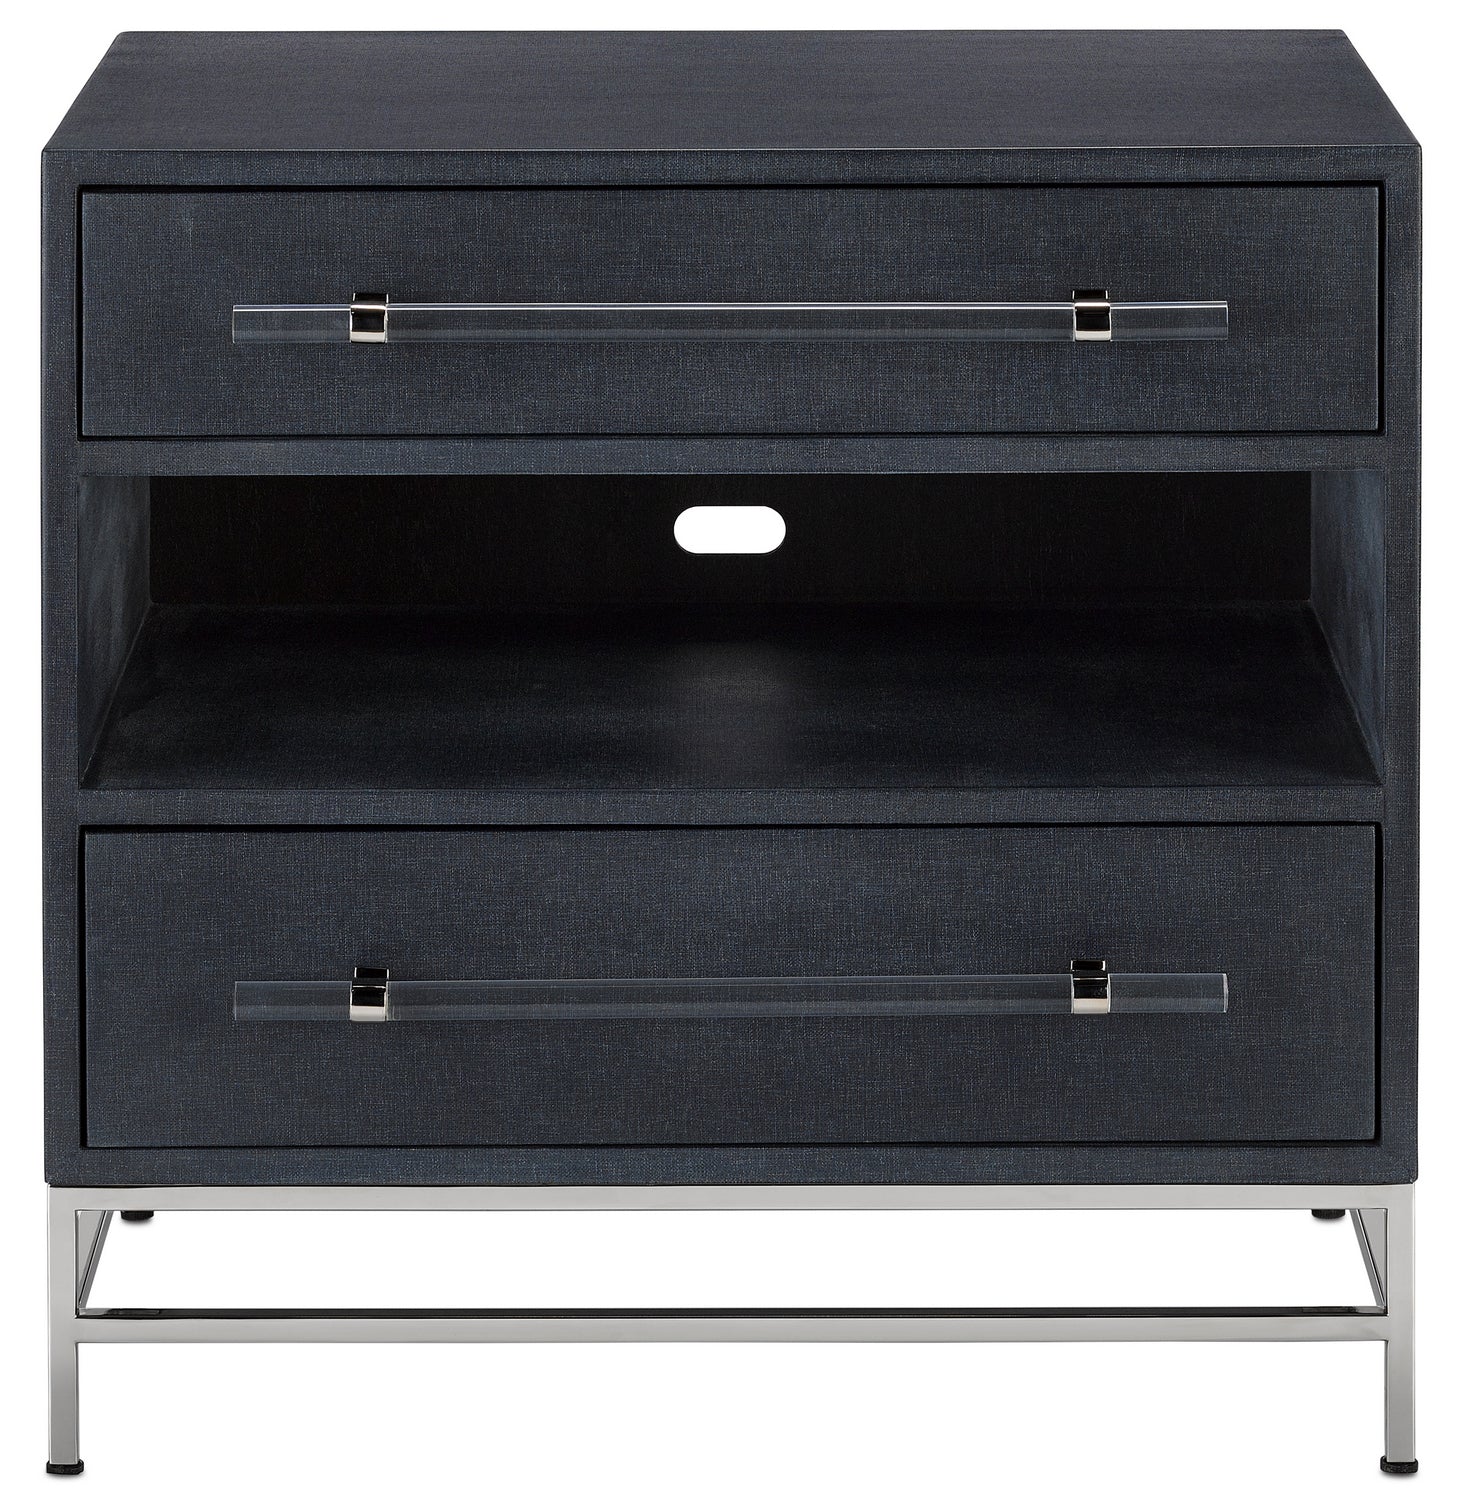 Nightstand from the Marcel collection in Navy Lacquered Linen/Polished Nickel/Black/Clear finish